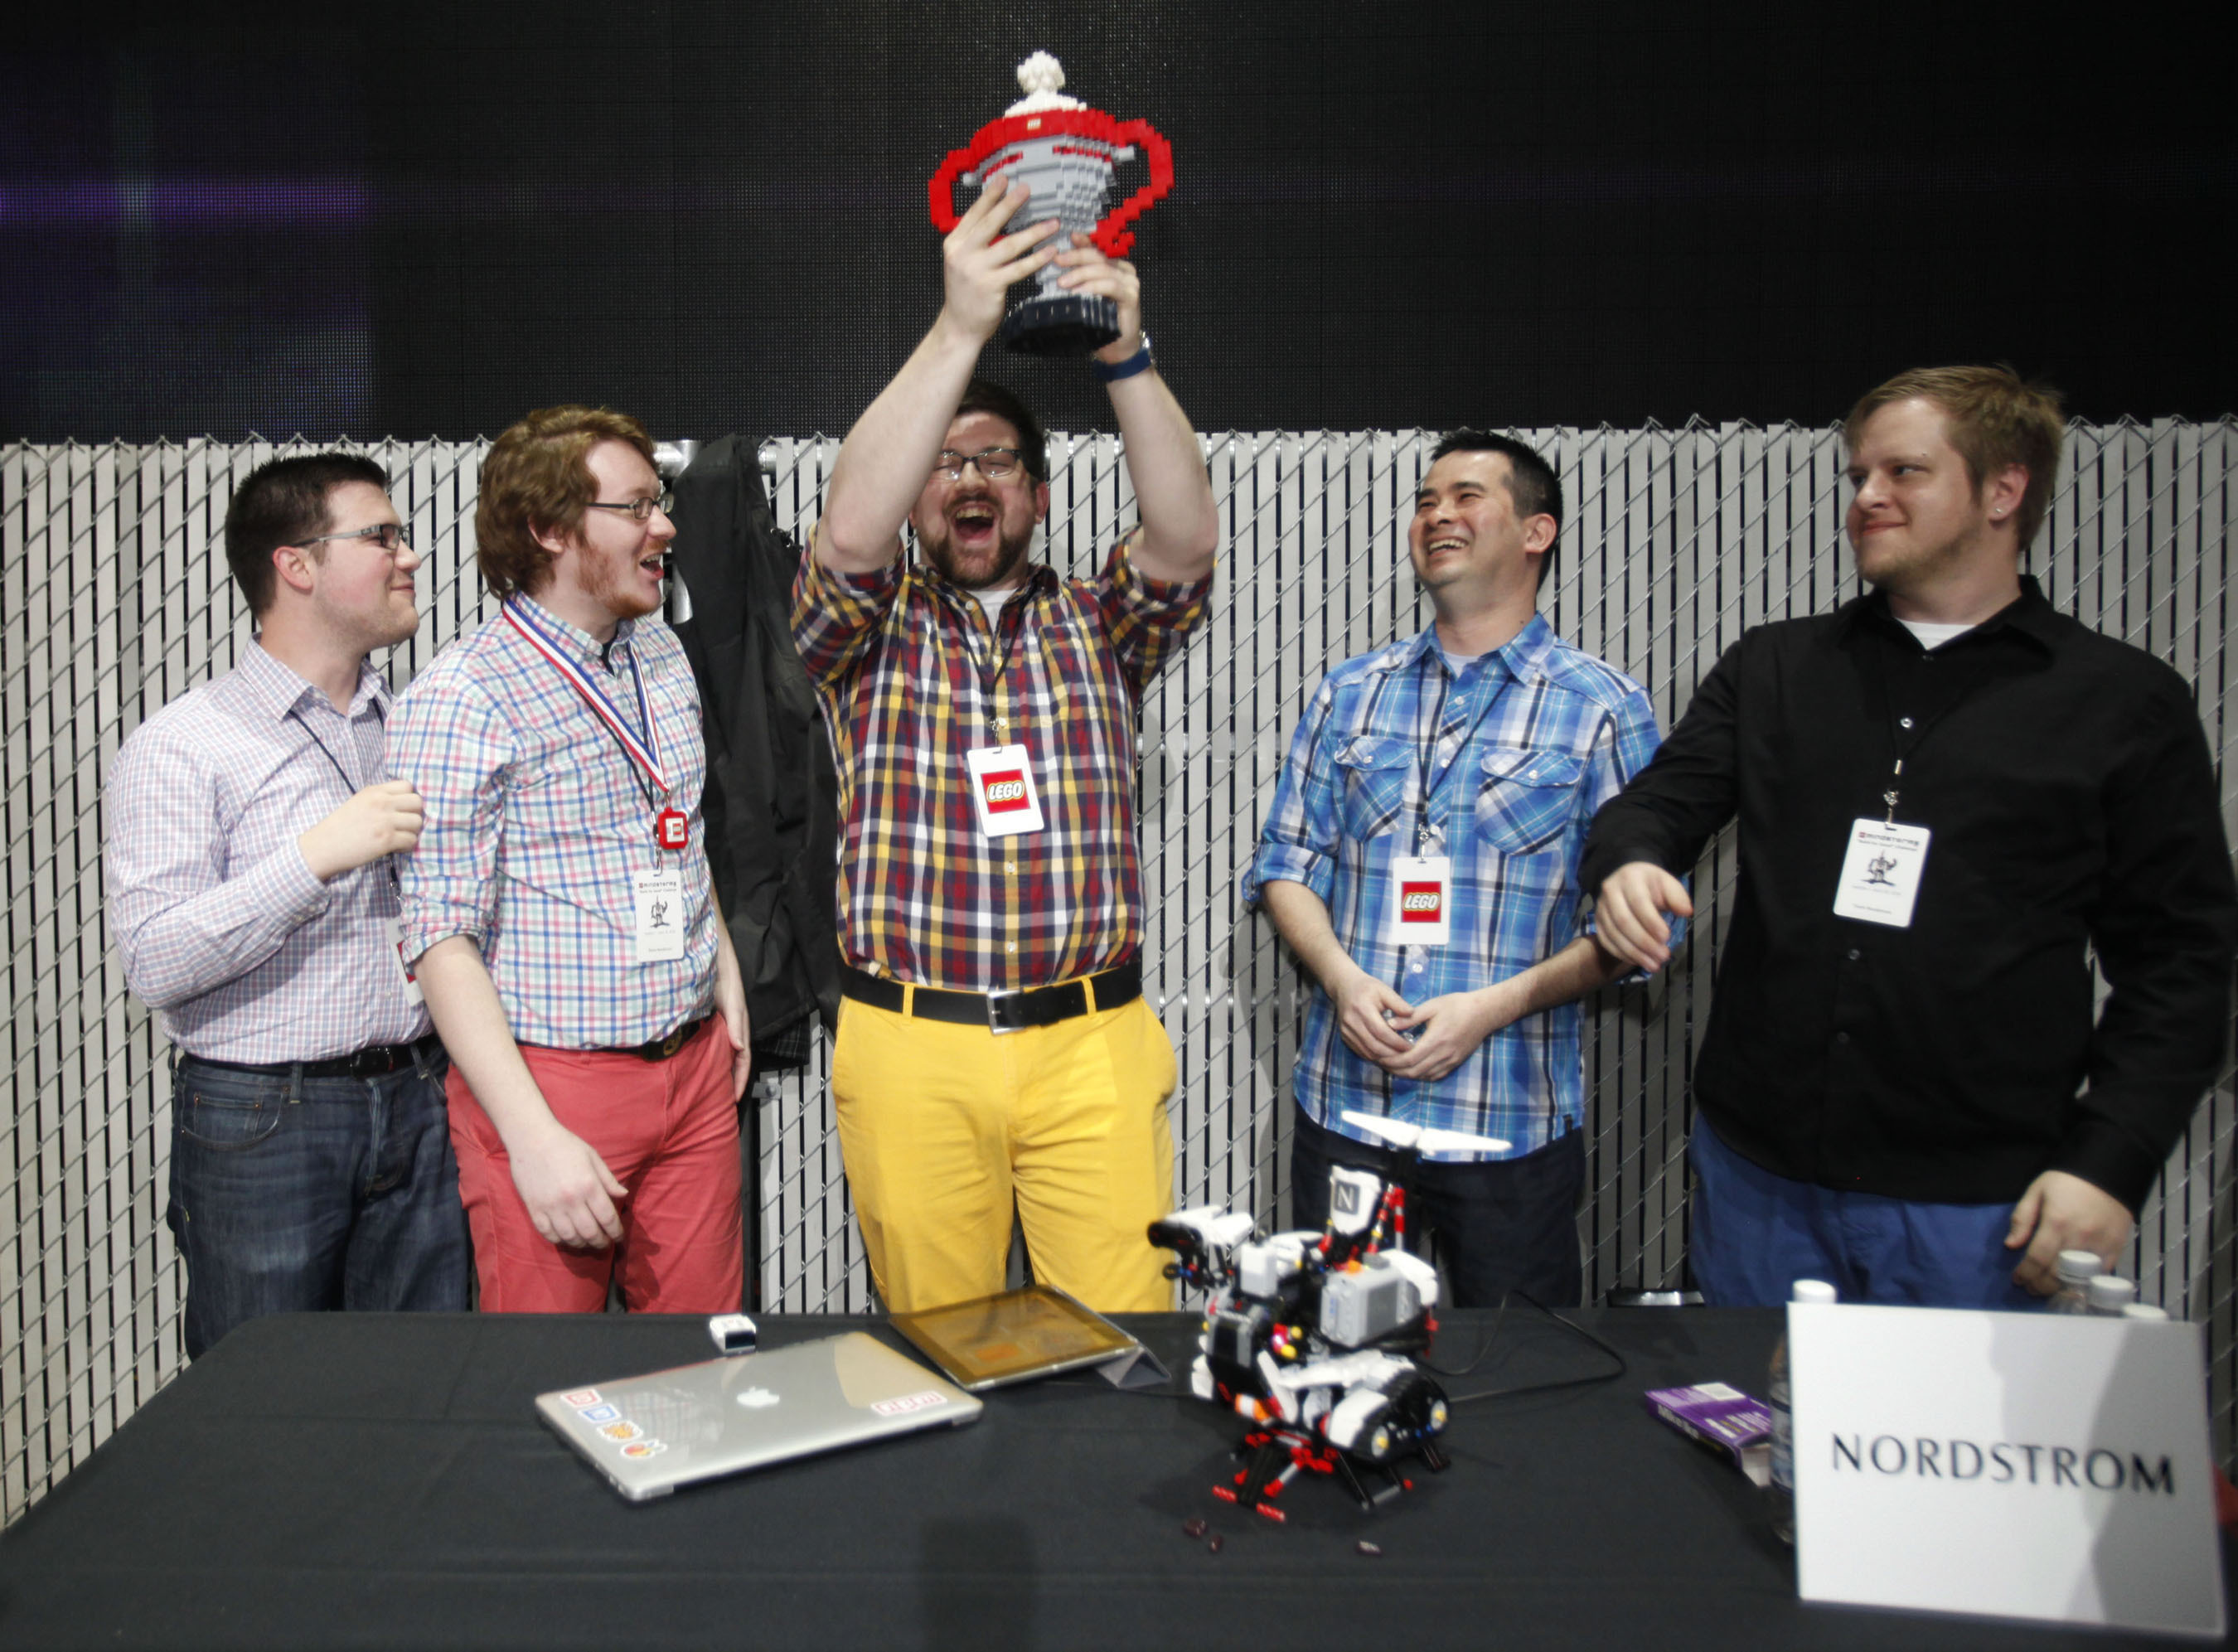 The Nordstrom team accepts the trophy for best LEGO MINDSTORMS EV3 robot during the "Build 4 Good" challenge at Seattle's EMP Museum on Thursday, April 10 2014. Local companies including Amazon, Egencia, Expedia, HTC, Nordstrom, Xbox and zulily built robots that celebrated creative solutions to everyday problems. (PRNewsFoto/LEGO Systems, Inc./Ron Wurzer/AP Images for The LEGO Group) (PRNewsFoto/LEGO SYSTEMS_ INC_)